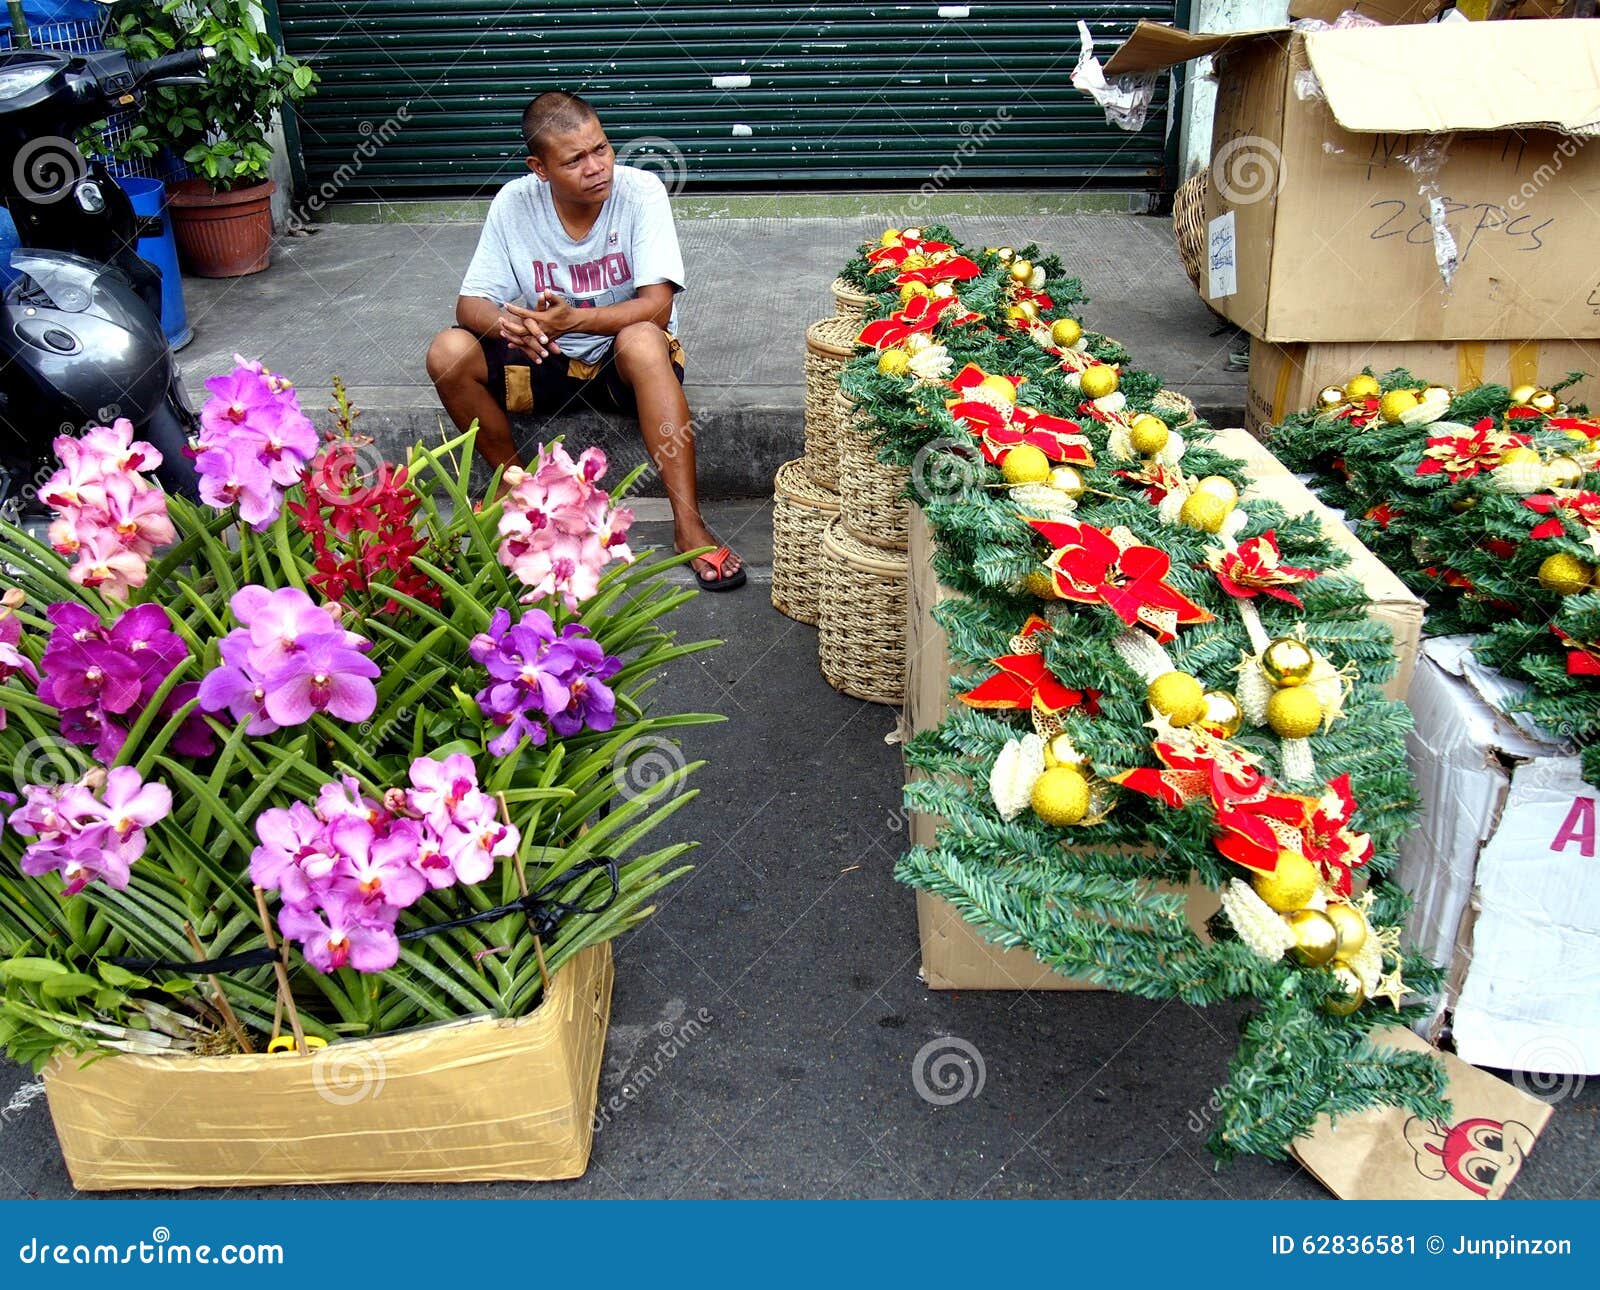 A Man Sells Decorative Plants And Flowers And Christmas  